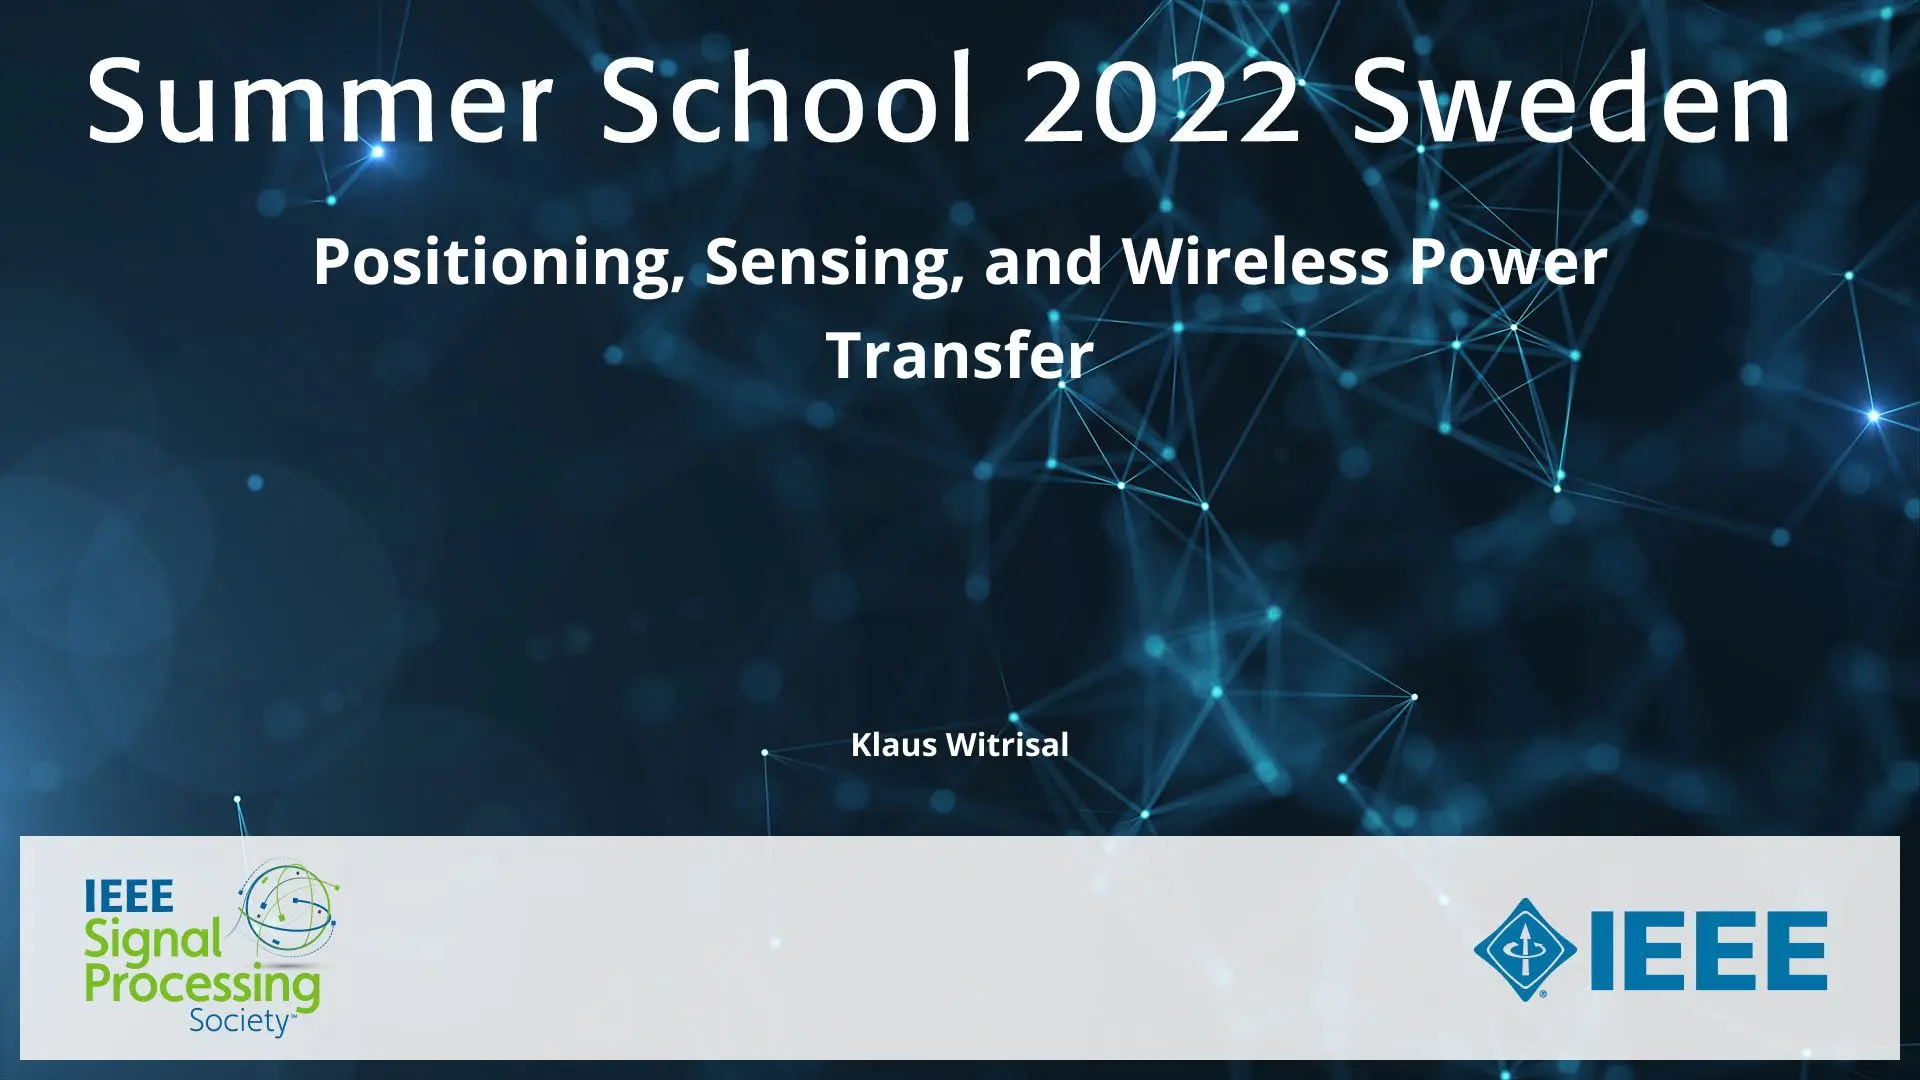 Positioning, Sensing, and Wireless Power Transfer